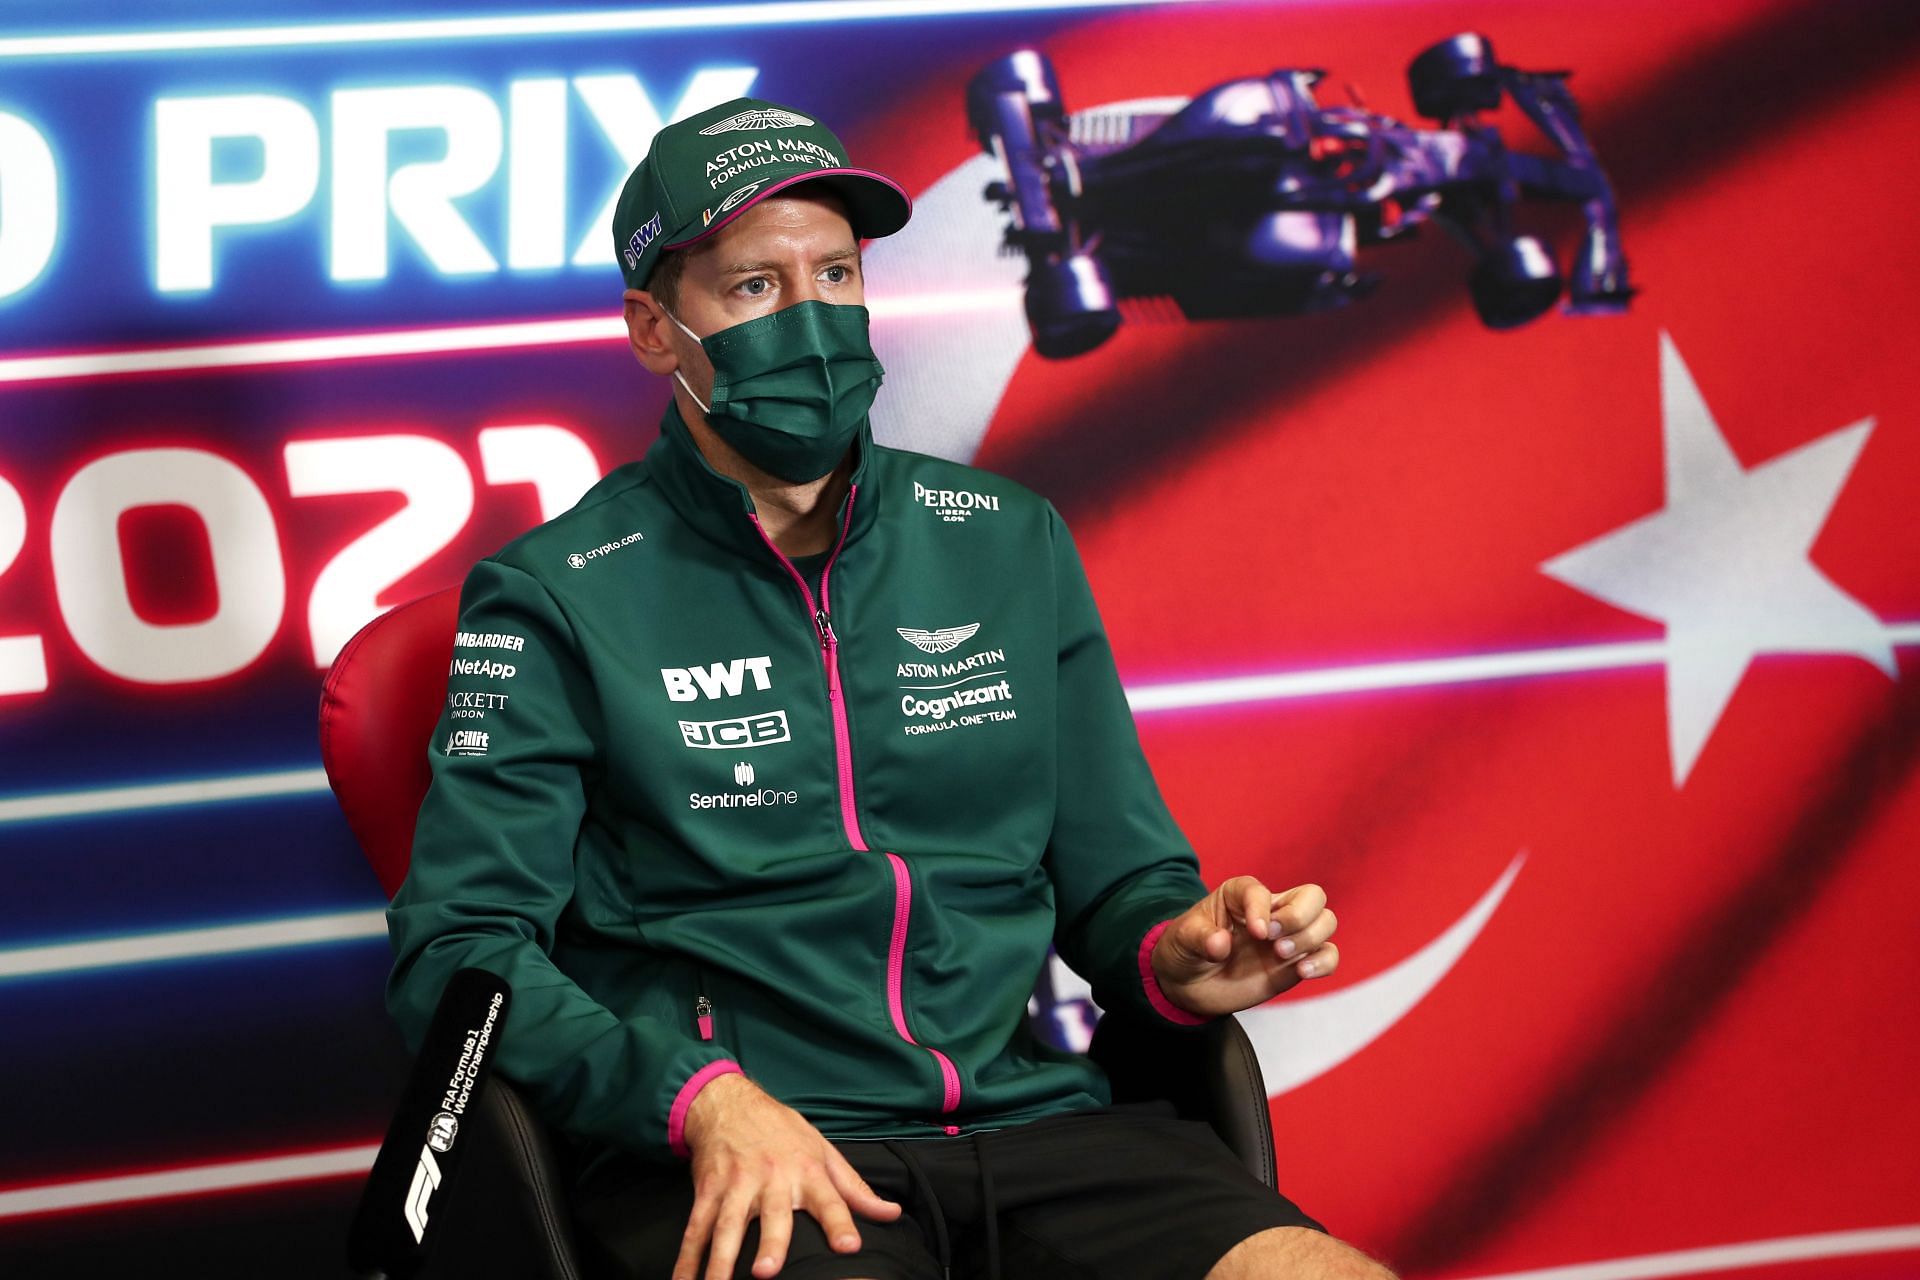 Sebastian Vettel of Aston Martin F1 Team talks in the Drivers Press Conference during previews ahead of the 2021 Turkish Grand Prix at Intercity Istanbul Park in Turkey. (Photo by Sedat Suna - Pool/Getty Images)